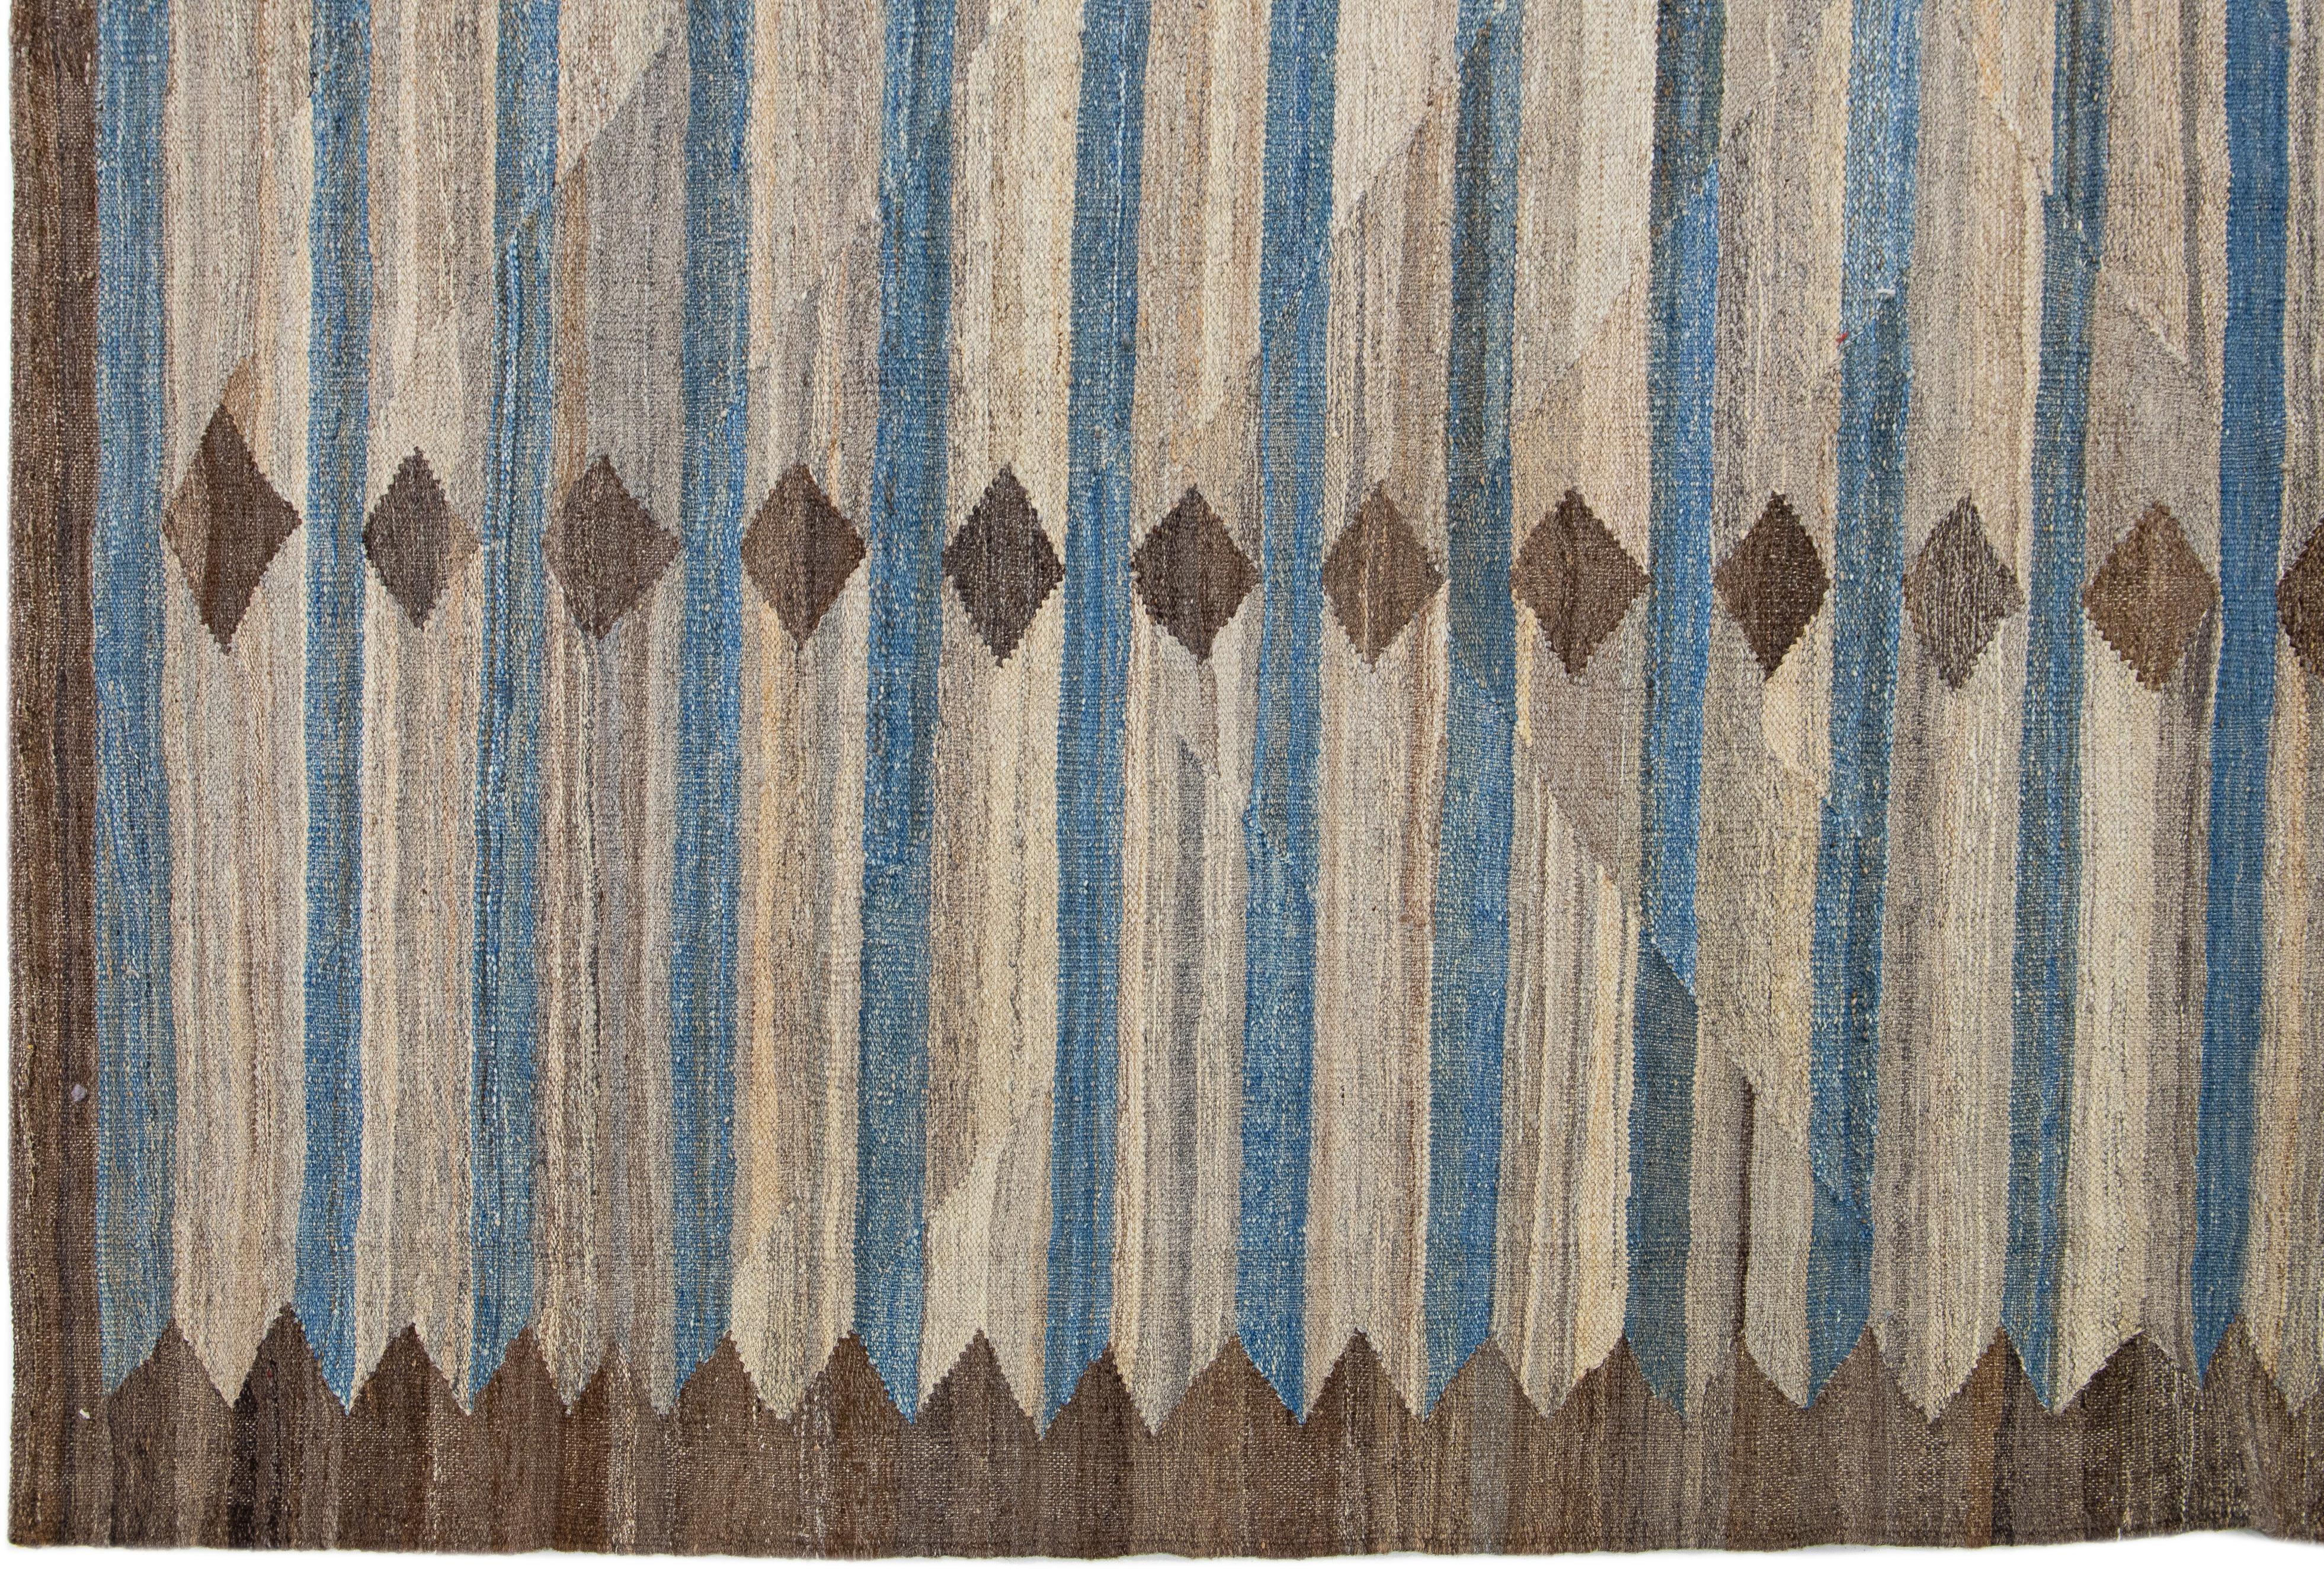 Deco Comteporary Kilim Wool Rug With Brown & Blue Geometric Design In New Condition For Sale In Norwalk, CT